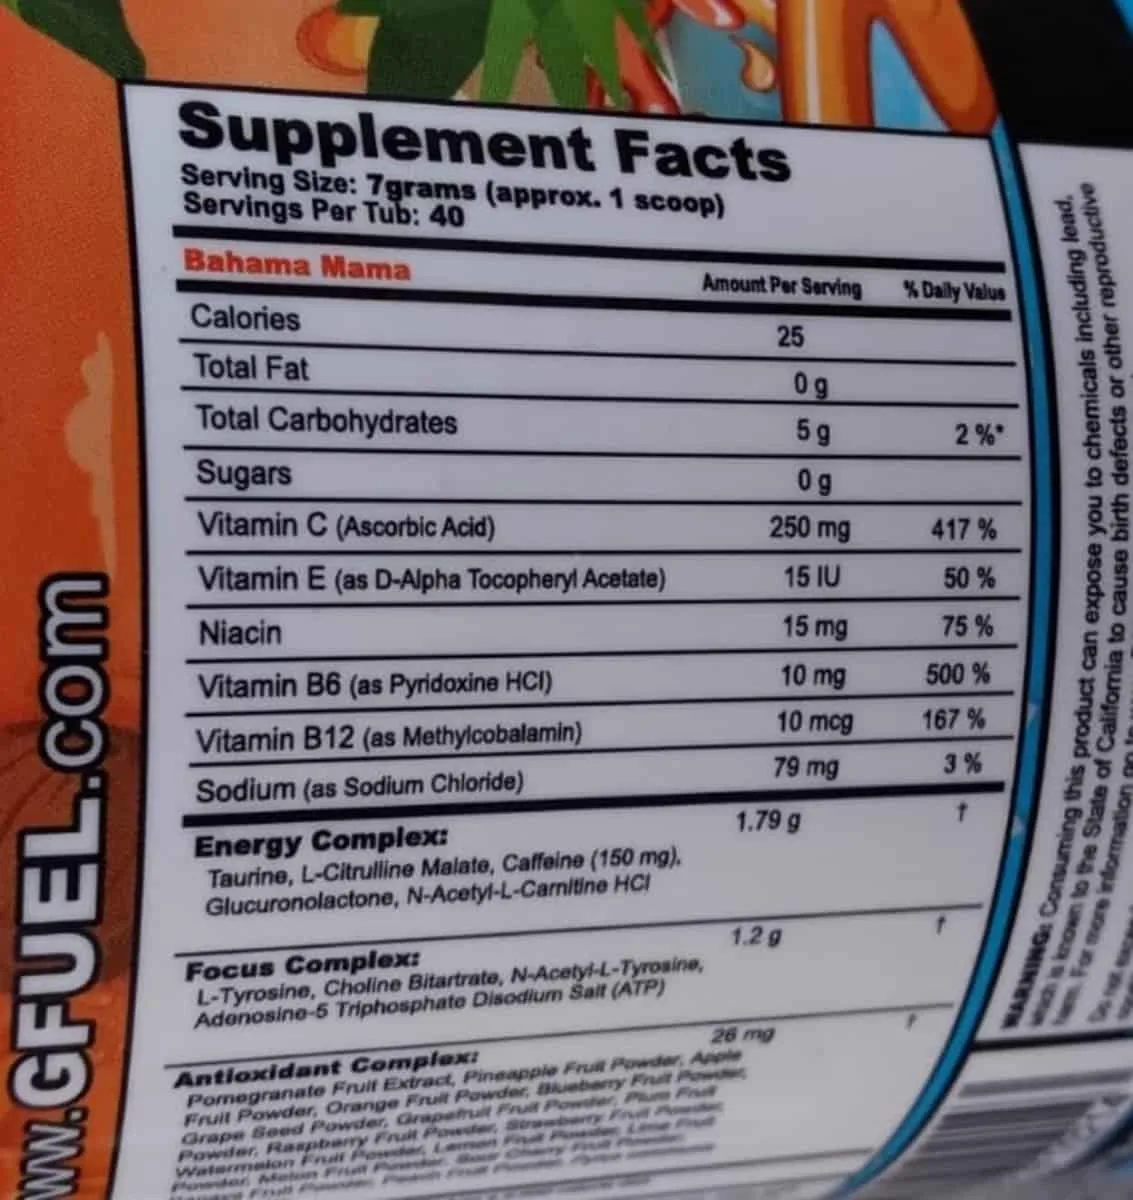 Supplement facts, G Fuel Powder, Label on a tub